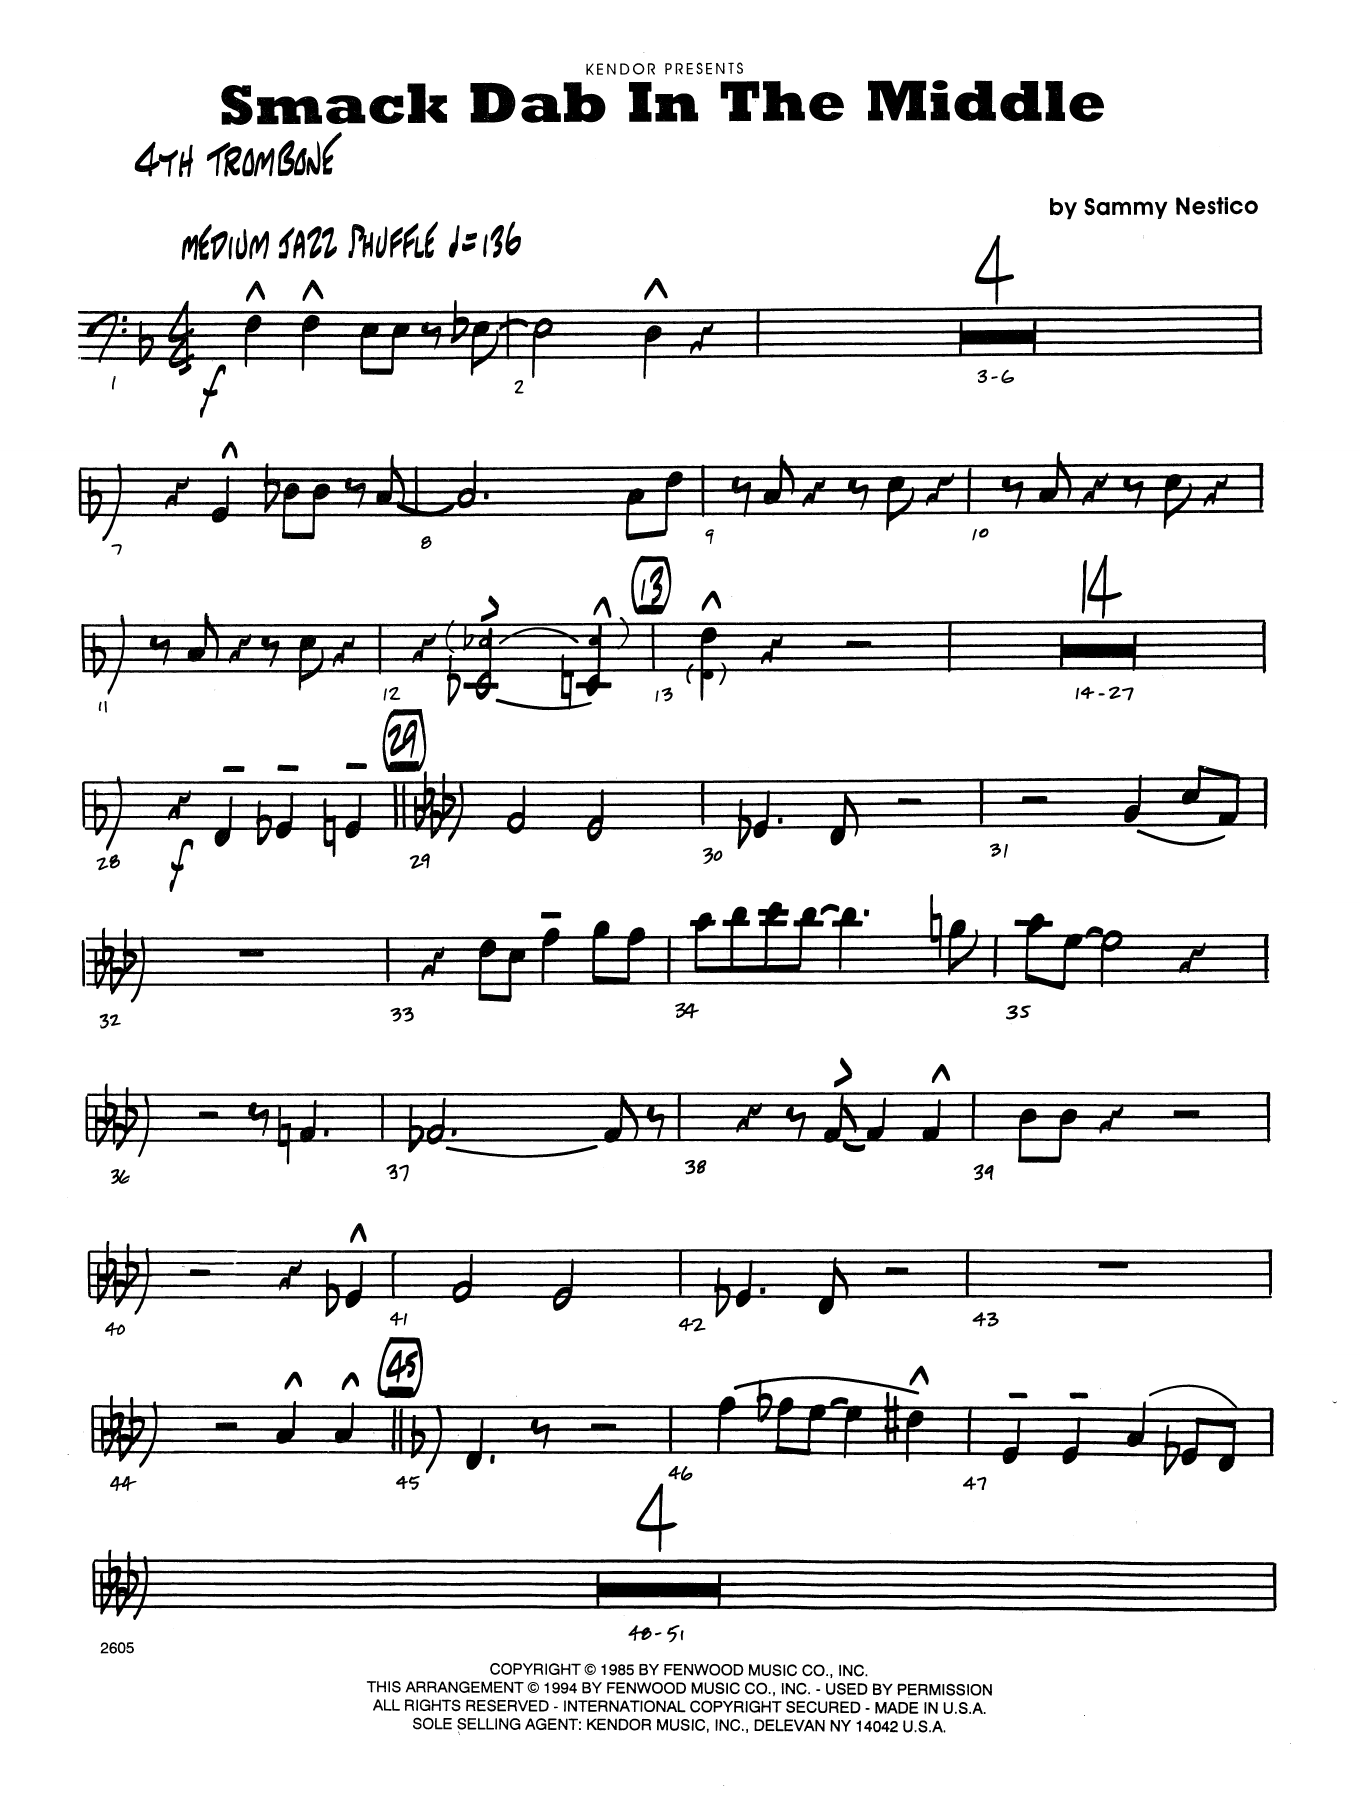 Download Sammy Nestico Smack Dab in the Middle - 4th Trombone Sheet Music